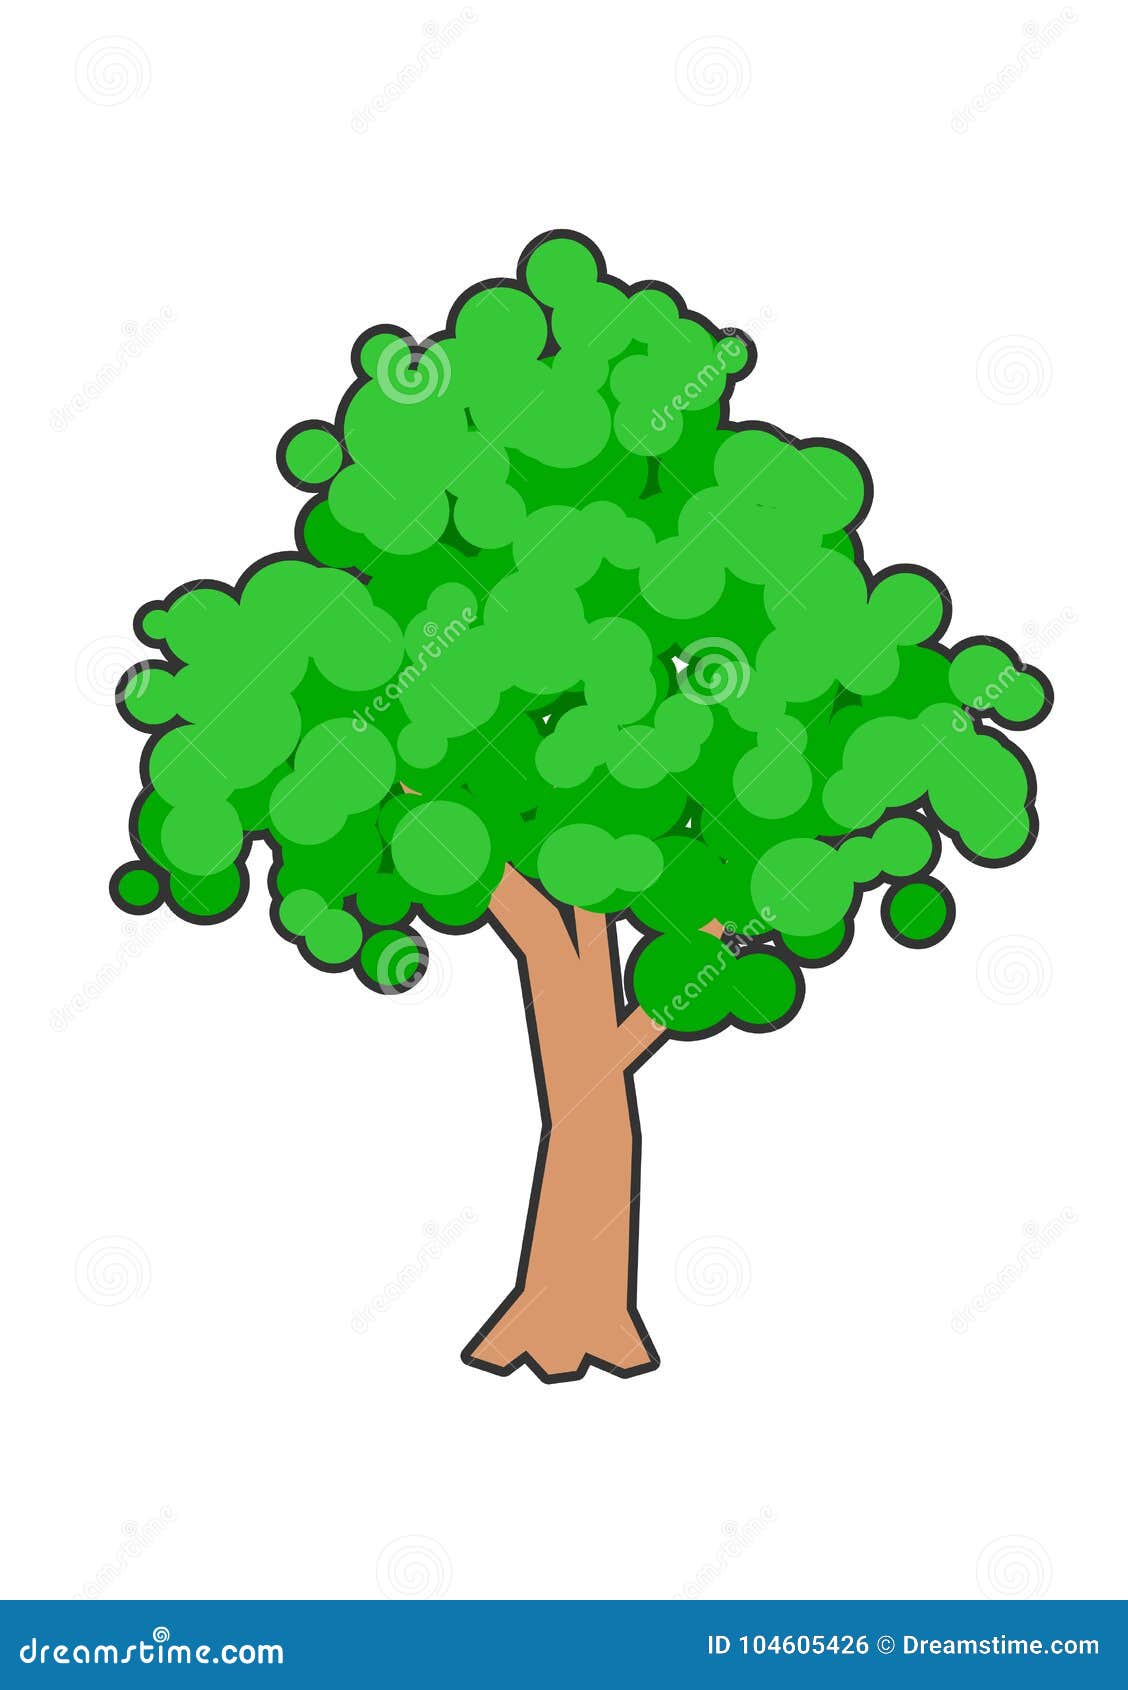 Simple Composition of a Lush, Green Tree Stock Vector ...